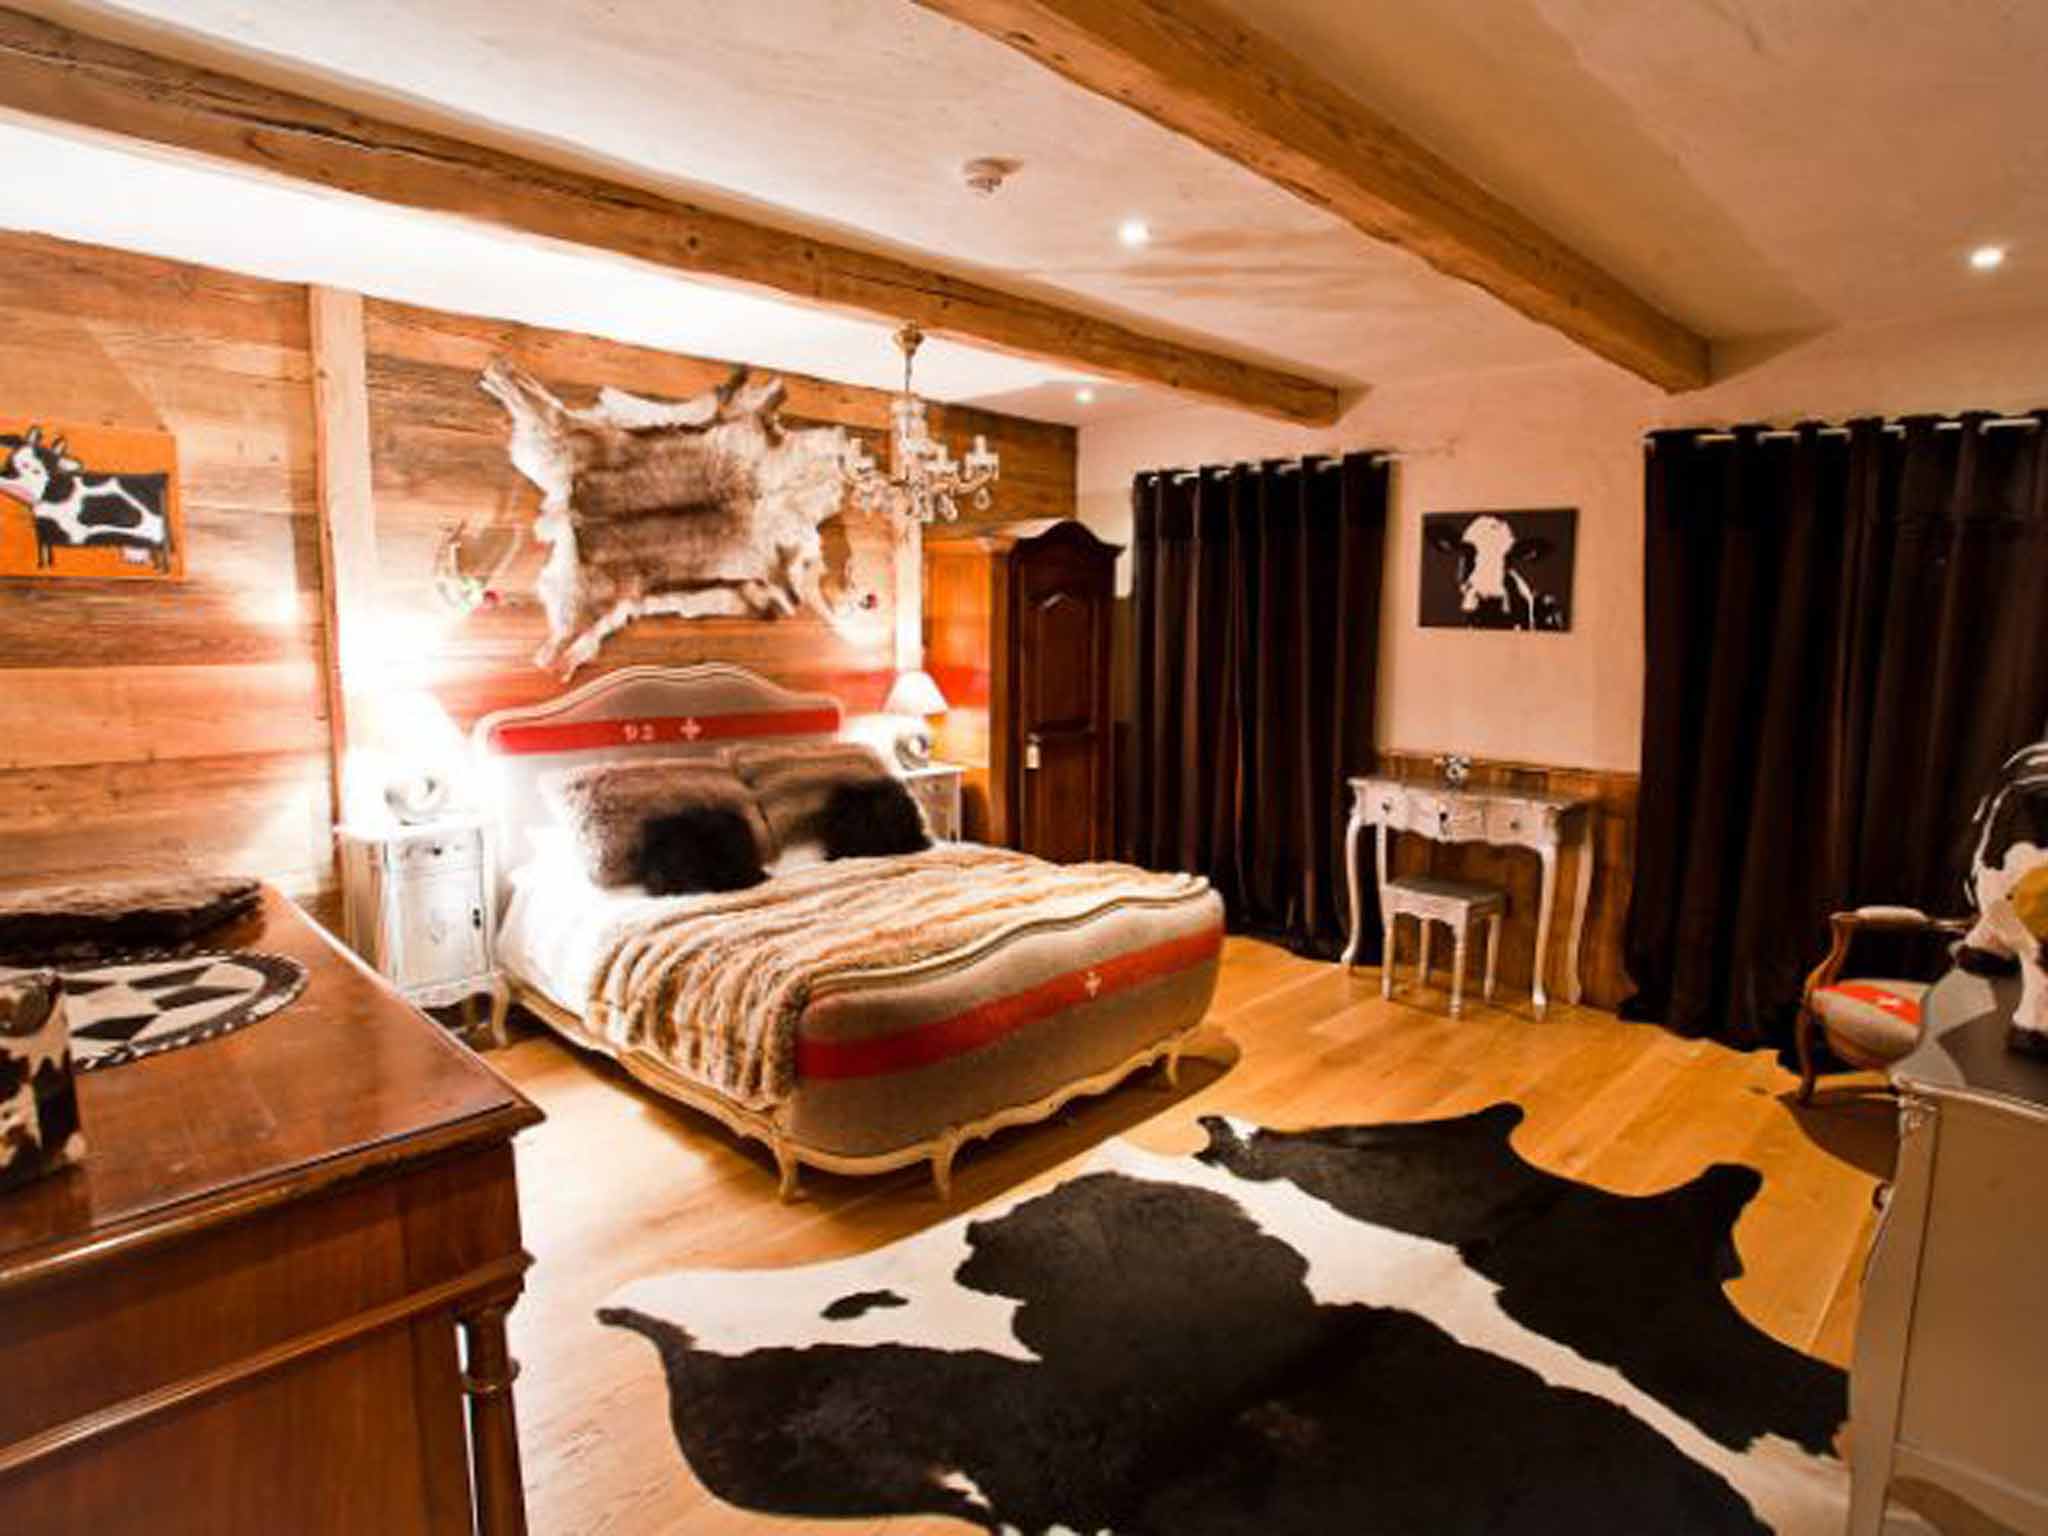 Canopy & Stars has put together a collection of Alpine chalets for the 2015/16 ski season